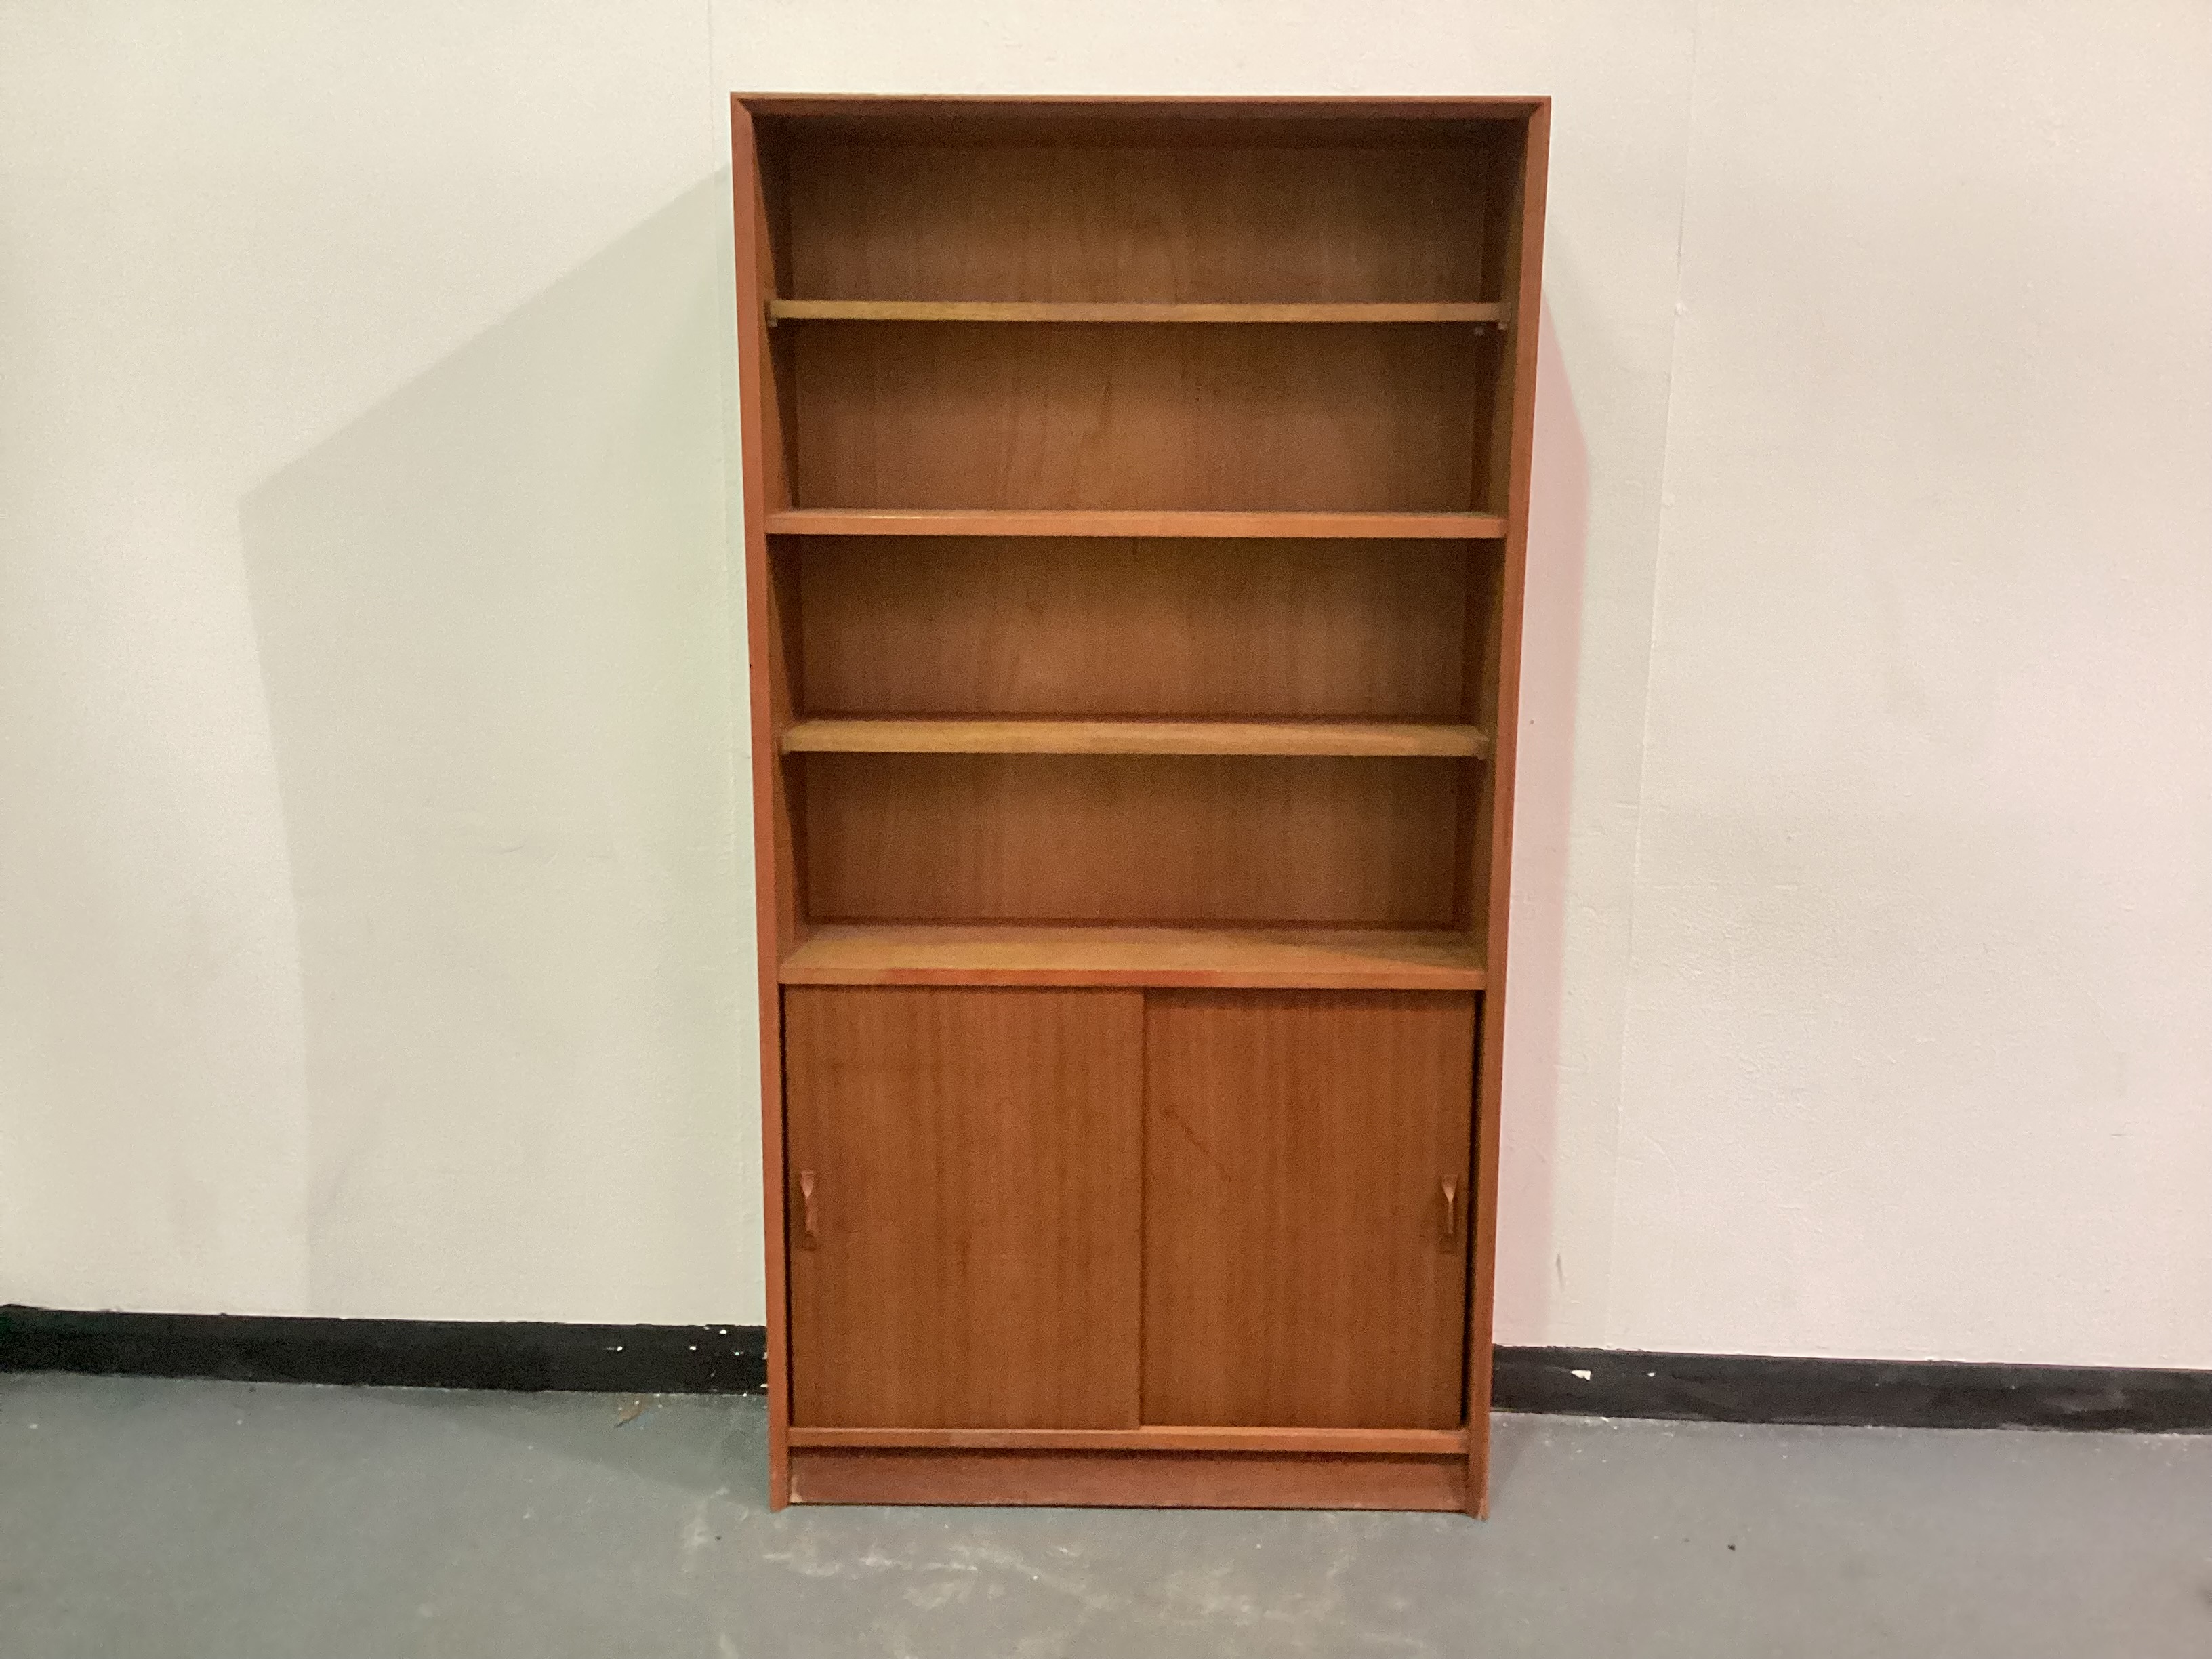 Display/Bookcase Unit with Doors